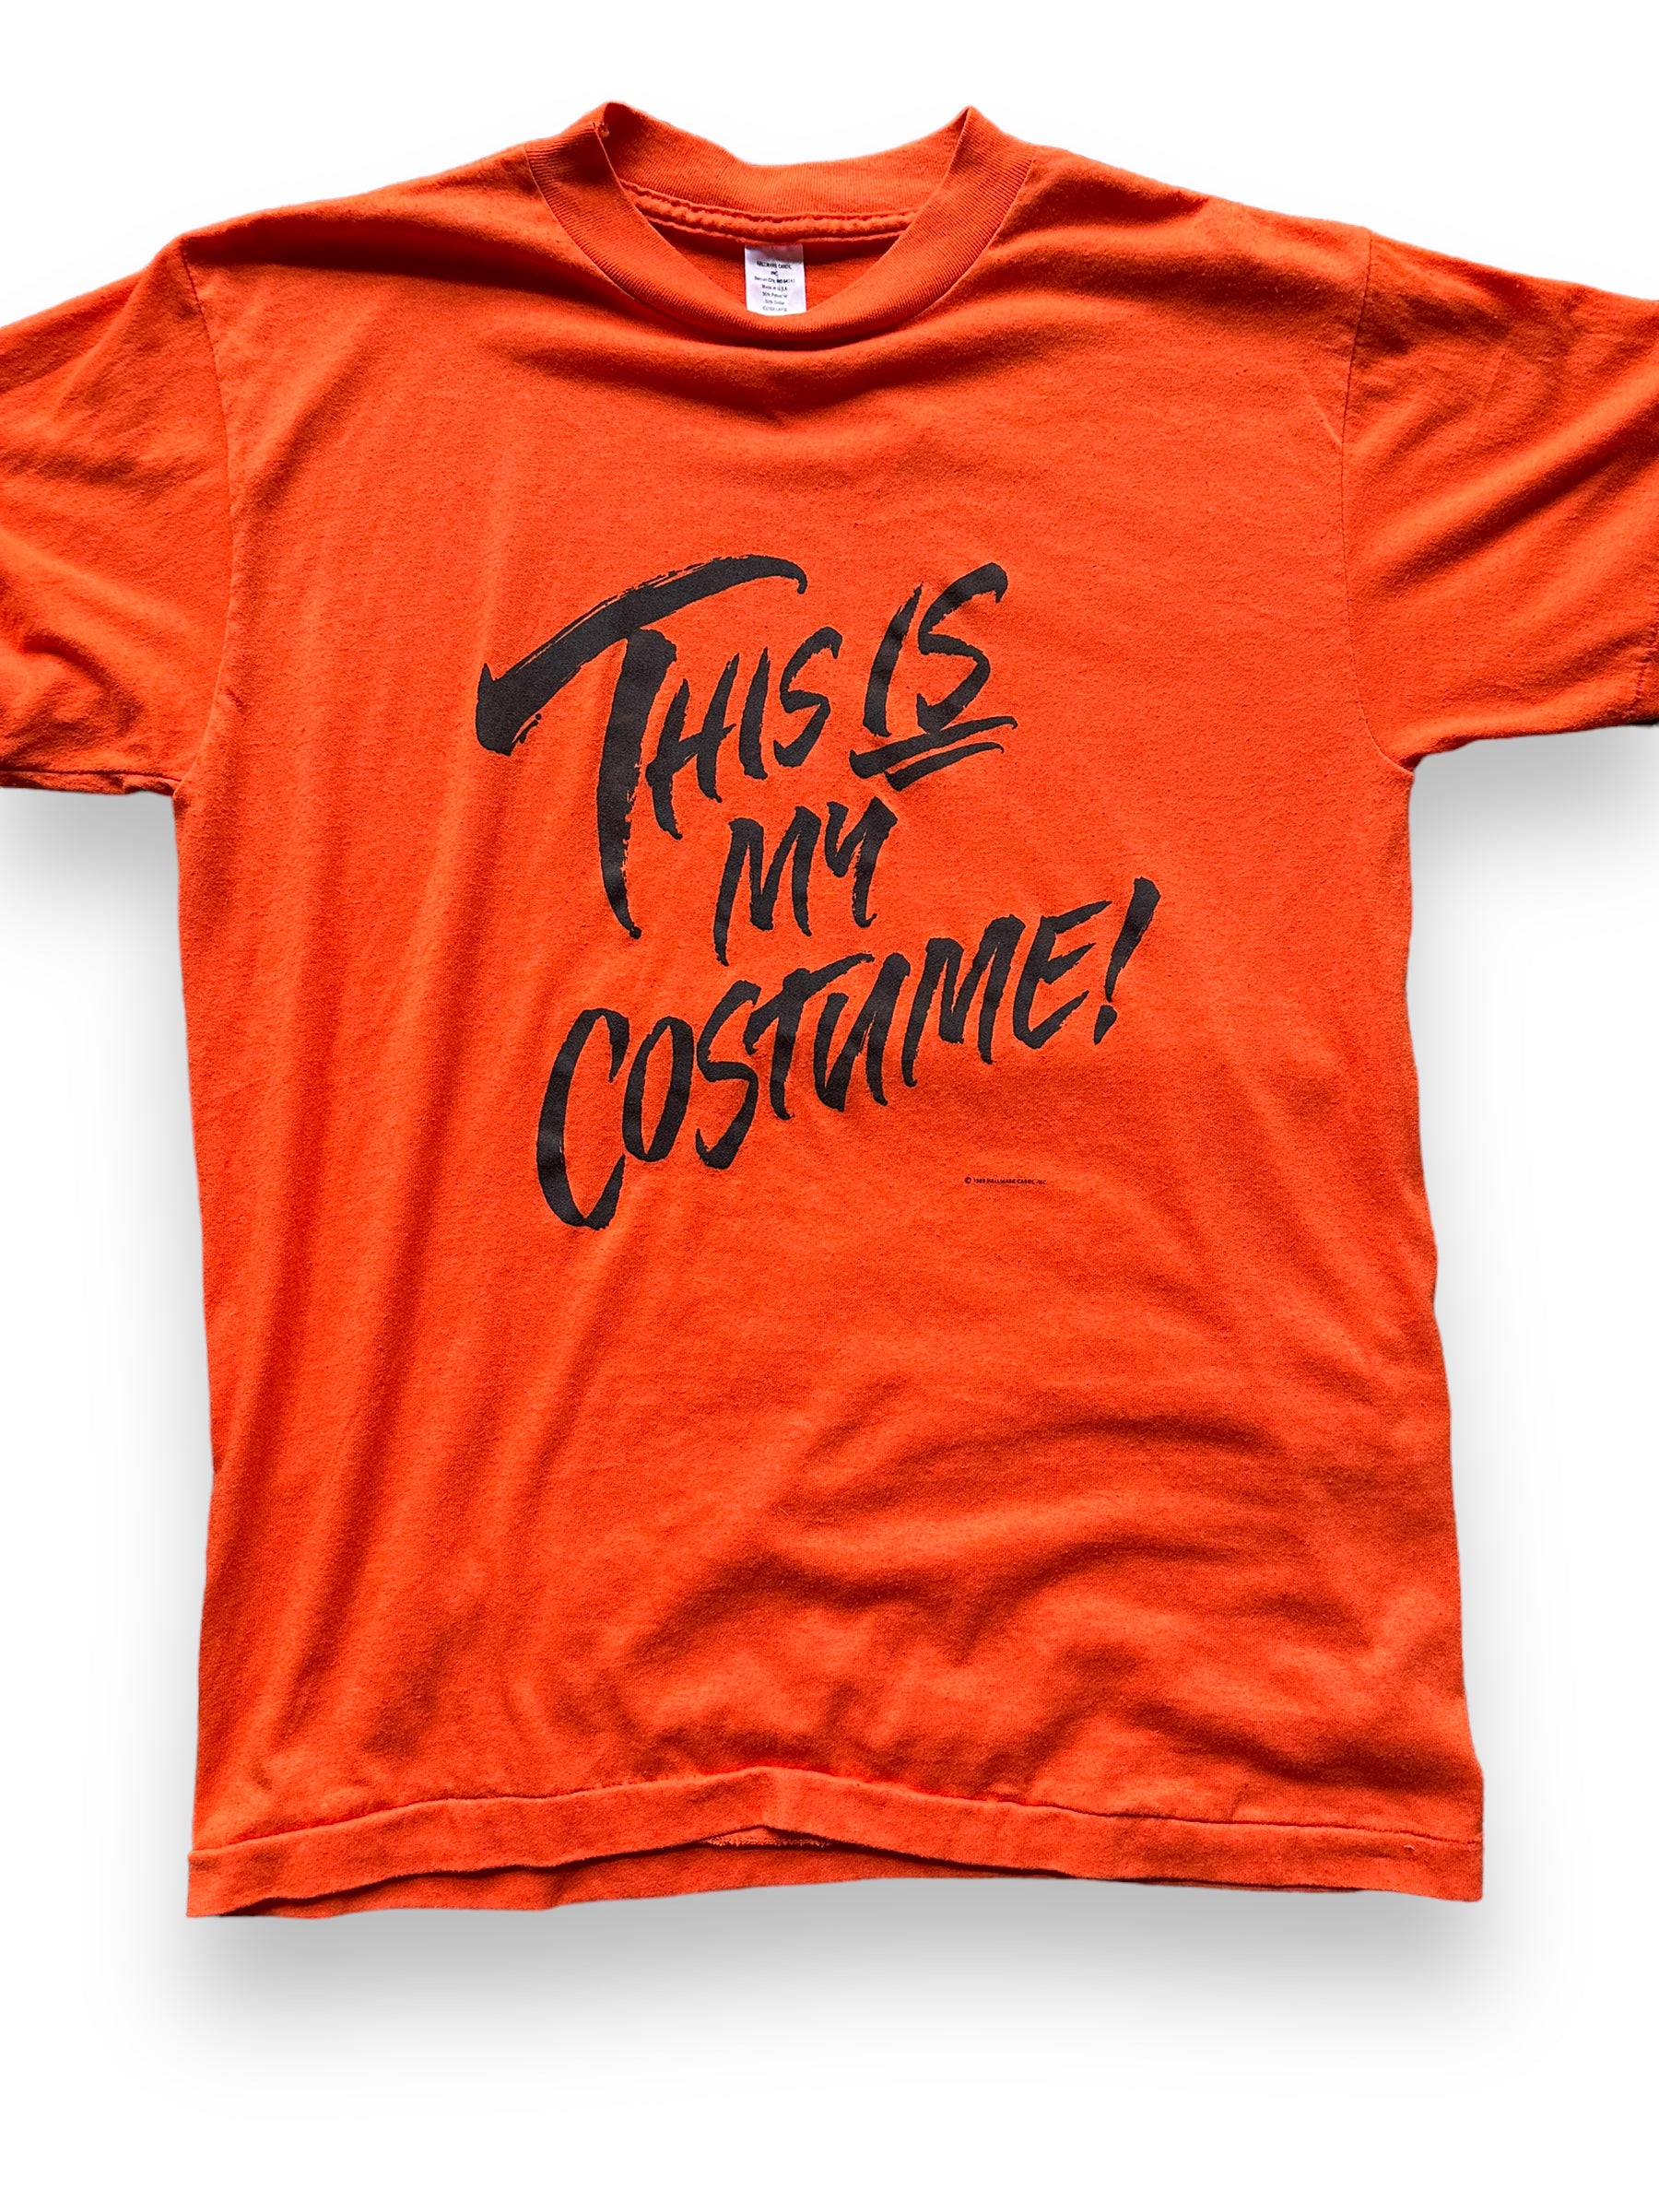 Front Detail on Vintage "This is My Costume" Halloween Tee SZ XL | Vintage T-Shirt Seattle | Barn Owl Vintage Tees Seattle